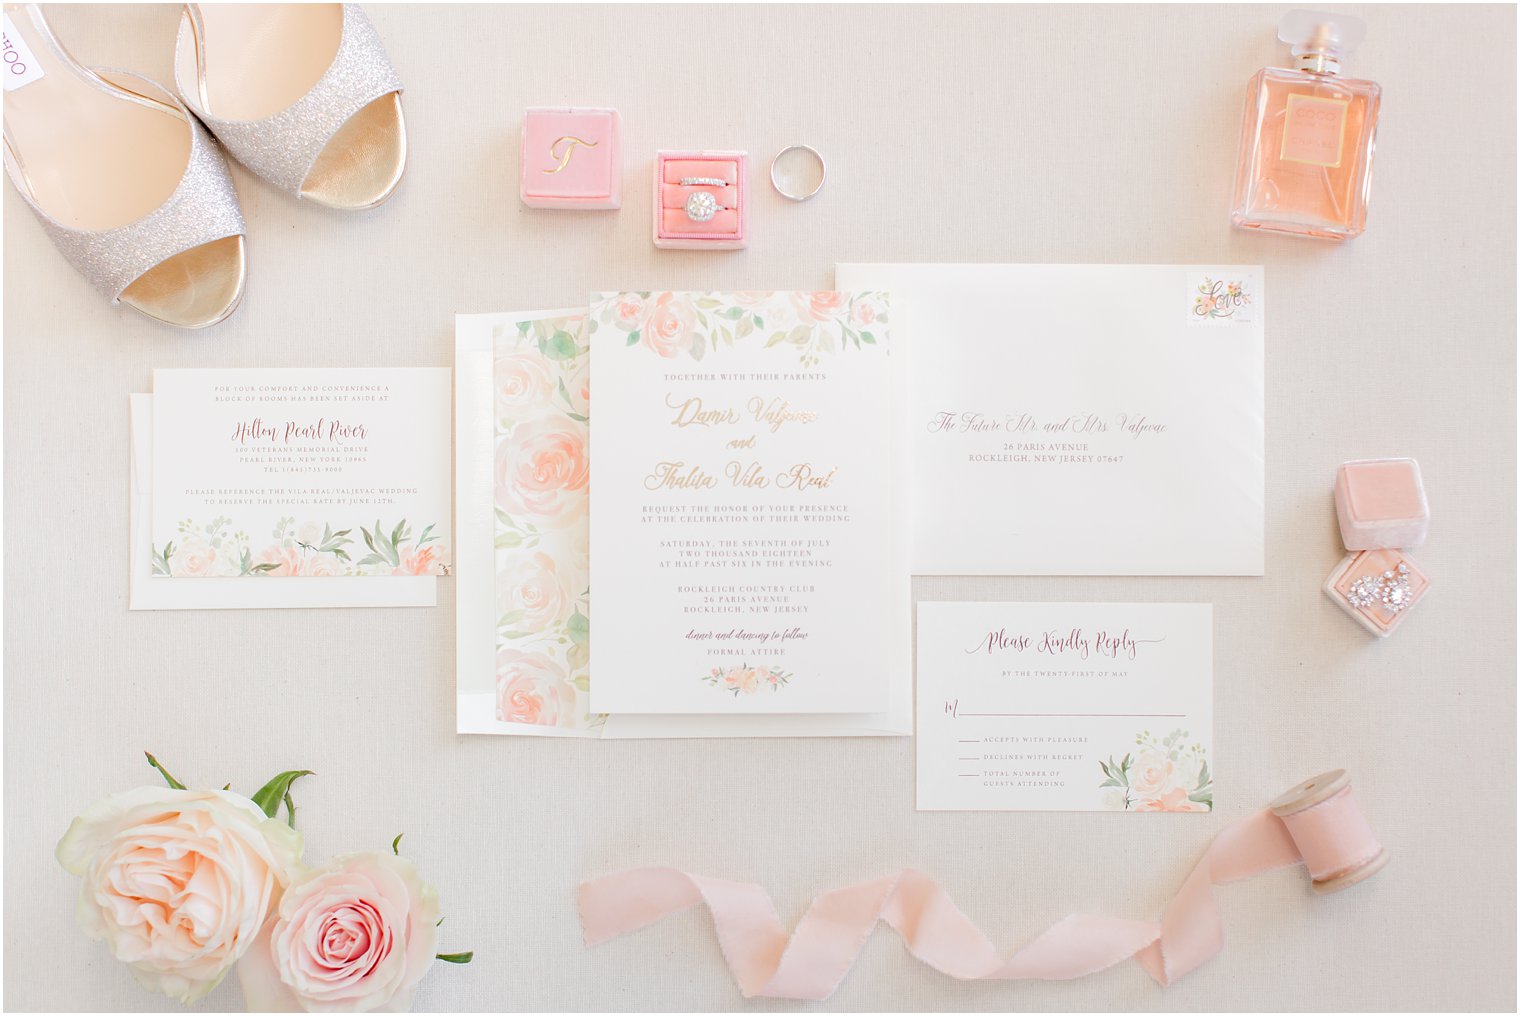 Wedding invitation by Perfectly Invited